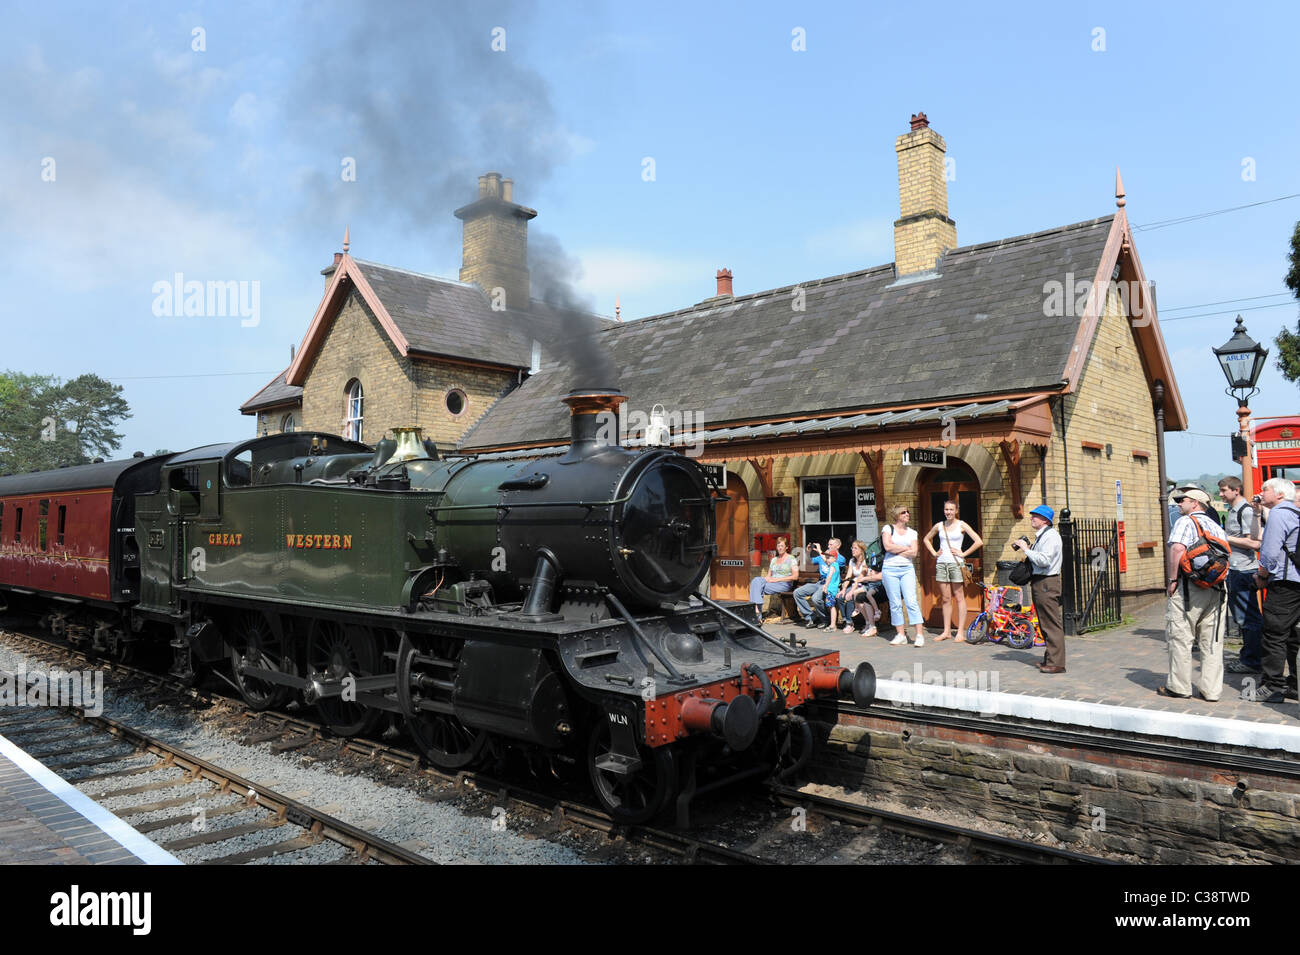 The Severn Valley Railway station Arley in Worcestershire England Uk Stock Photo